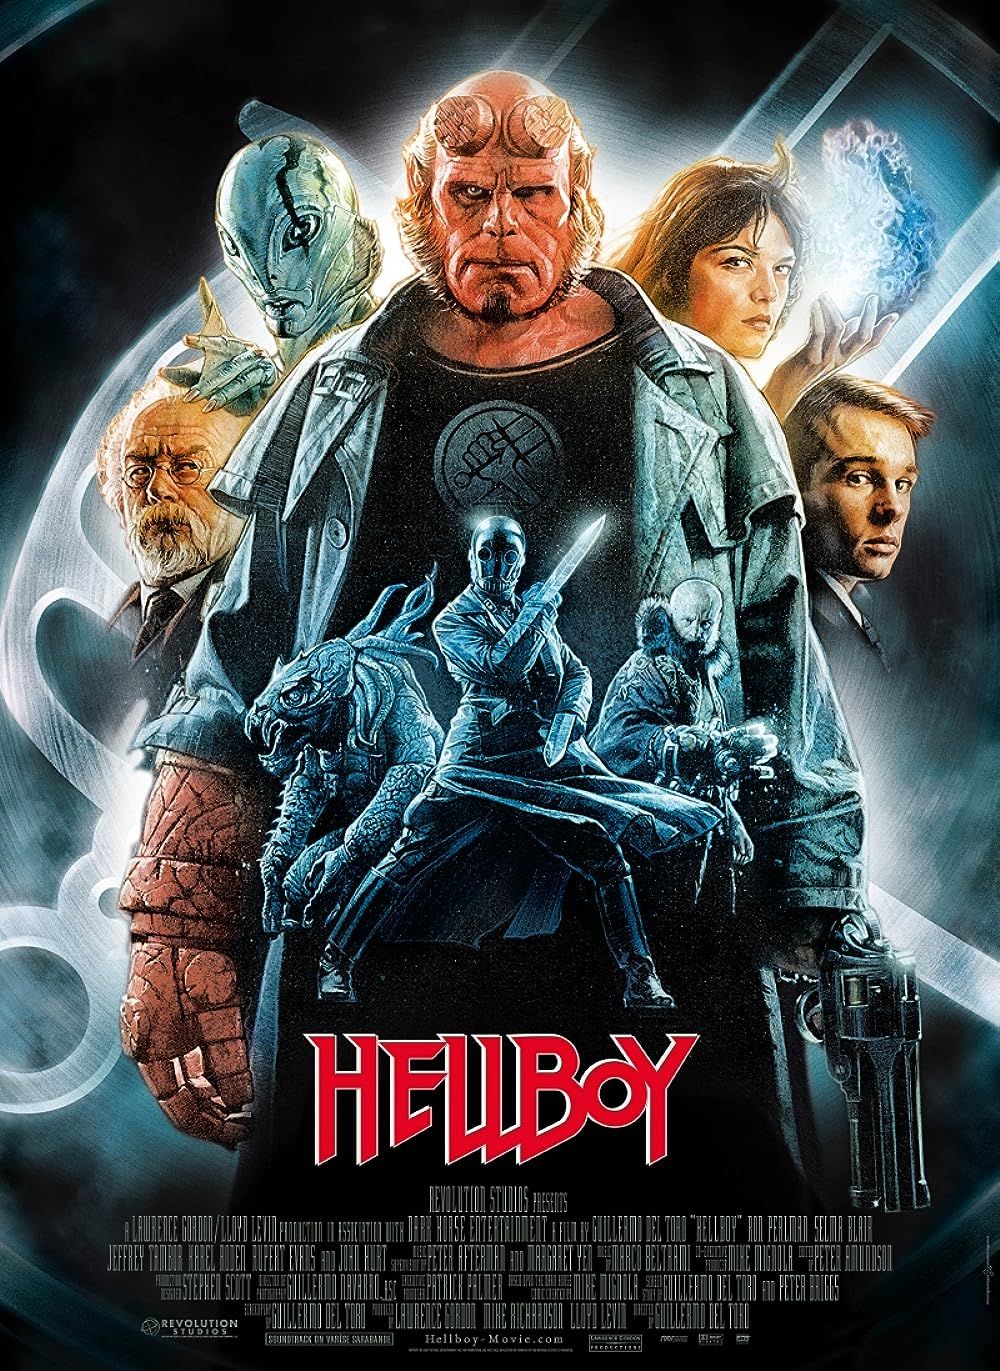 Hellboy and the Cast on the Poster for Hellboy